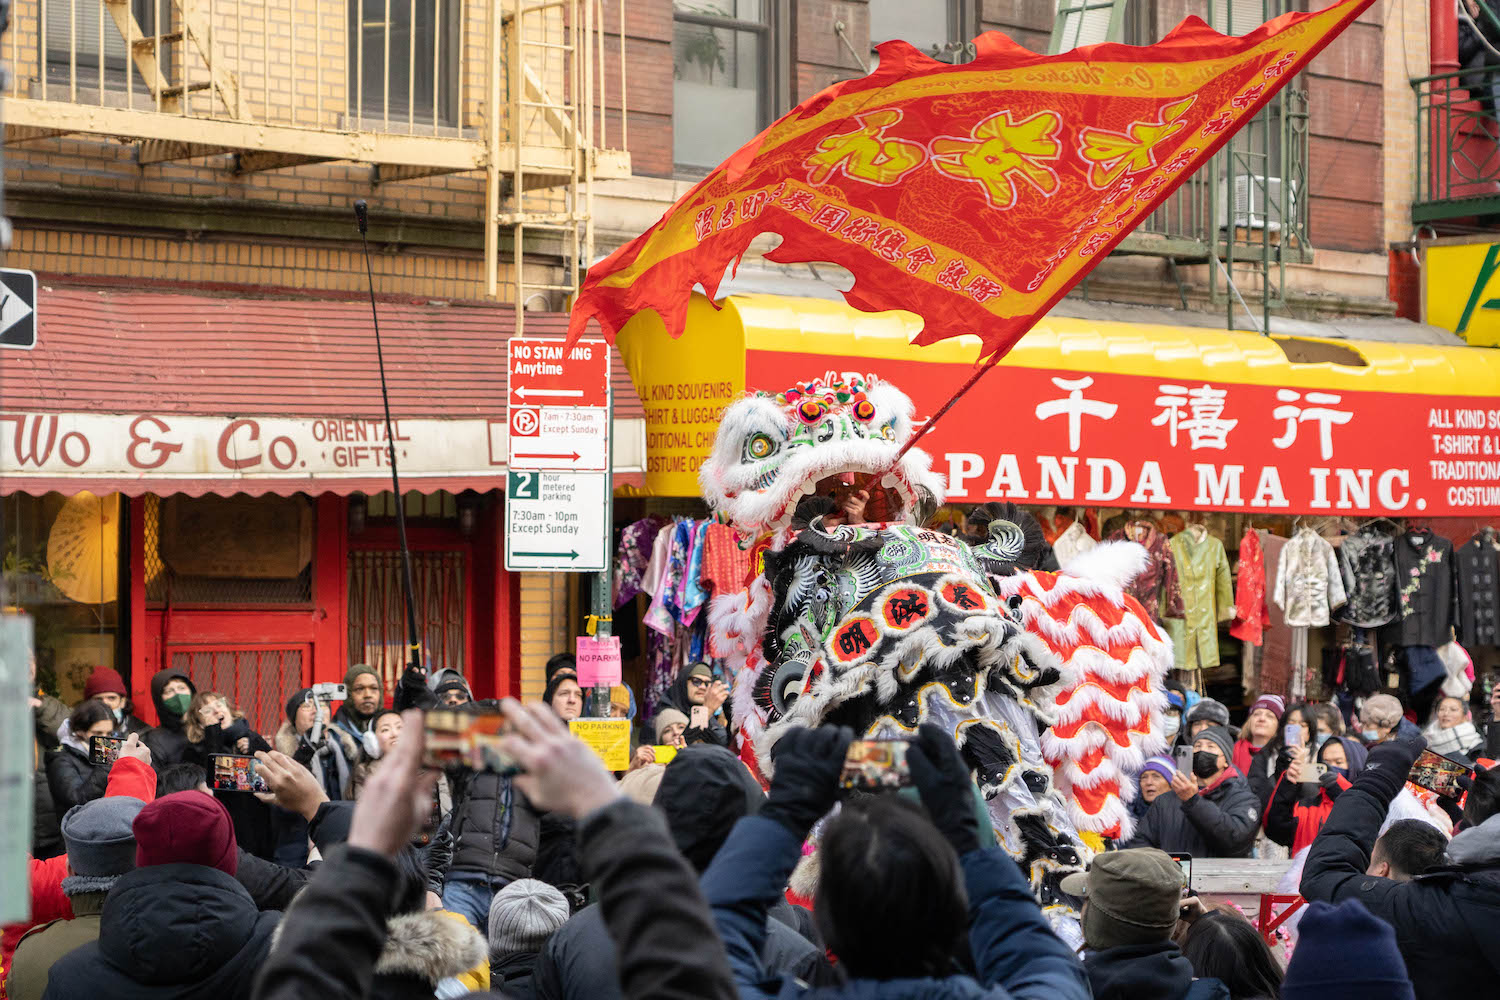 A lion dancer waving a red flag on a stage in front of a store.